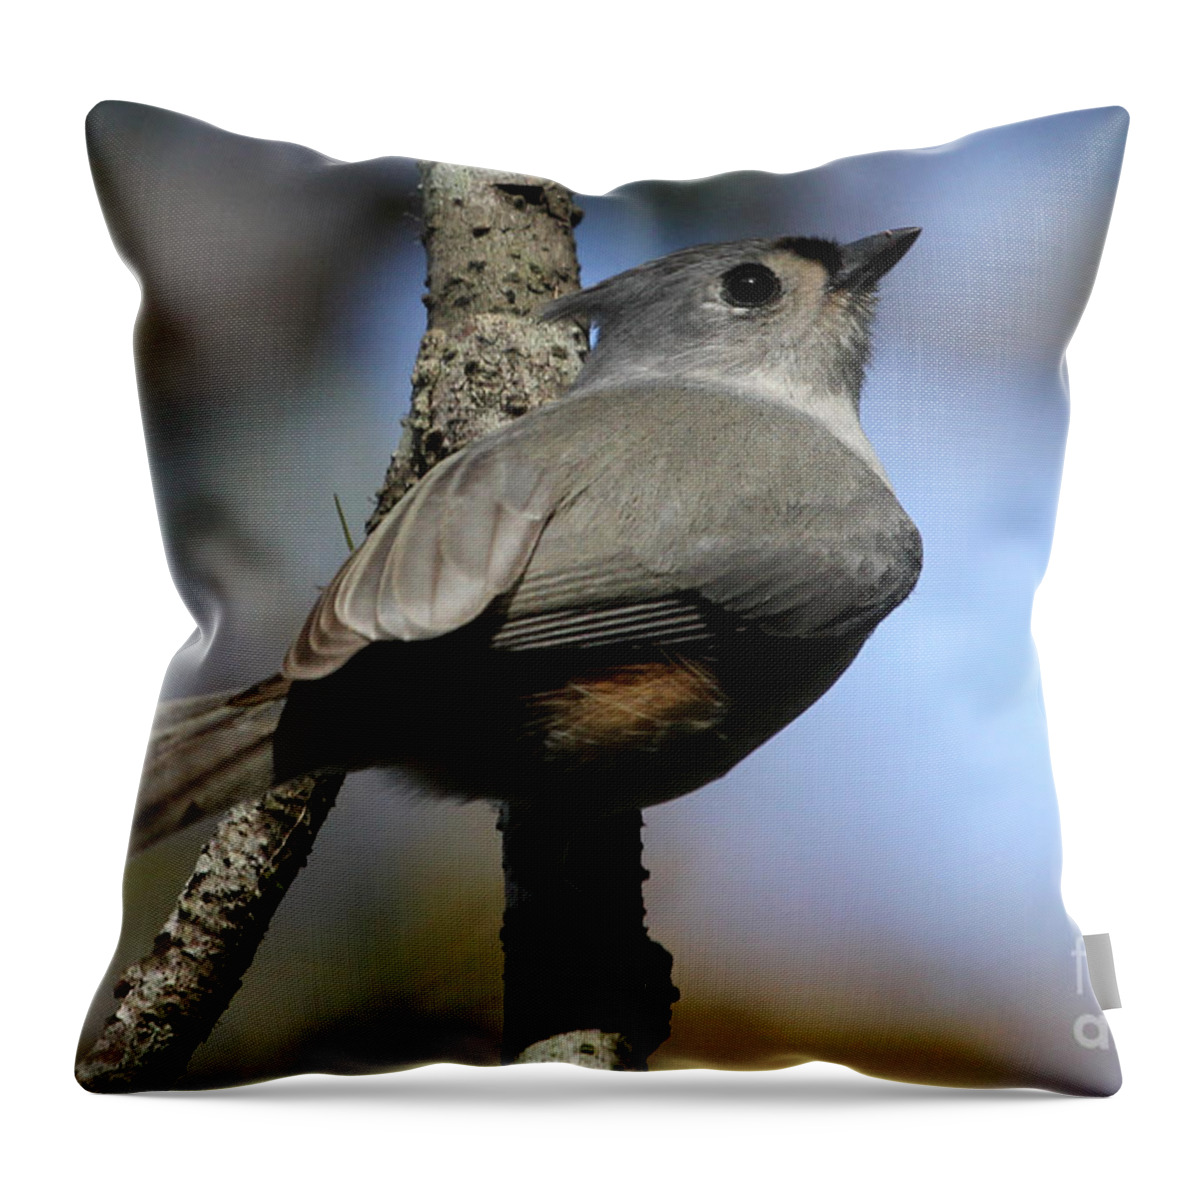 Tufted Titmouse Throw Pillow featuring the photograph Tufted Titmouse by Meg Rousher